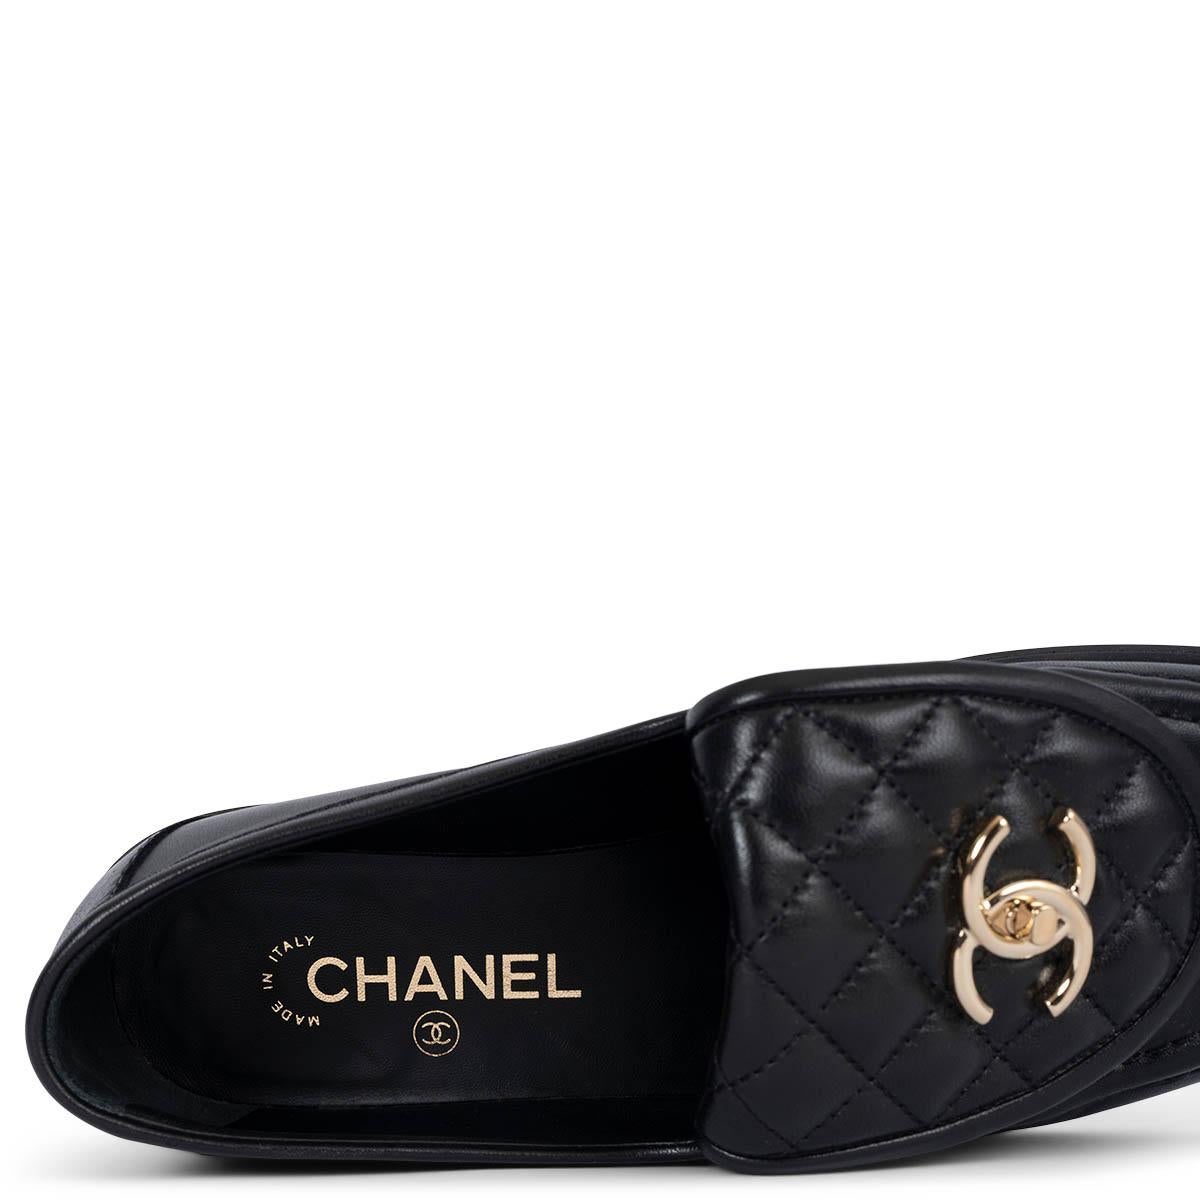 CHANEL black leather REV TURNLOCK Loafers Shoes 39 3